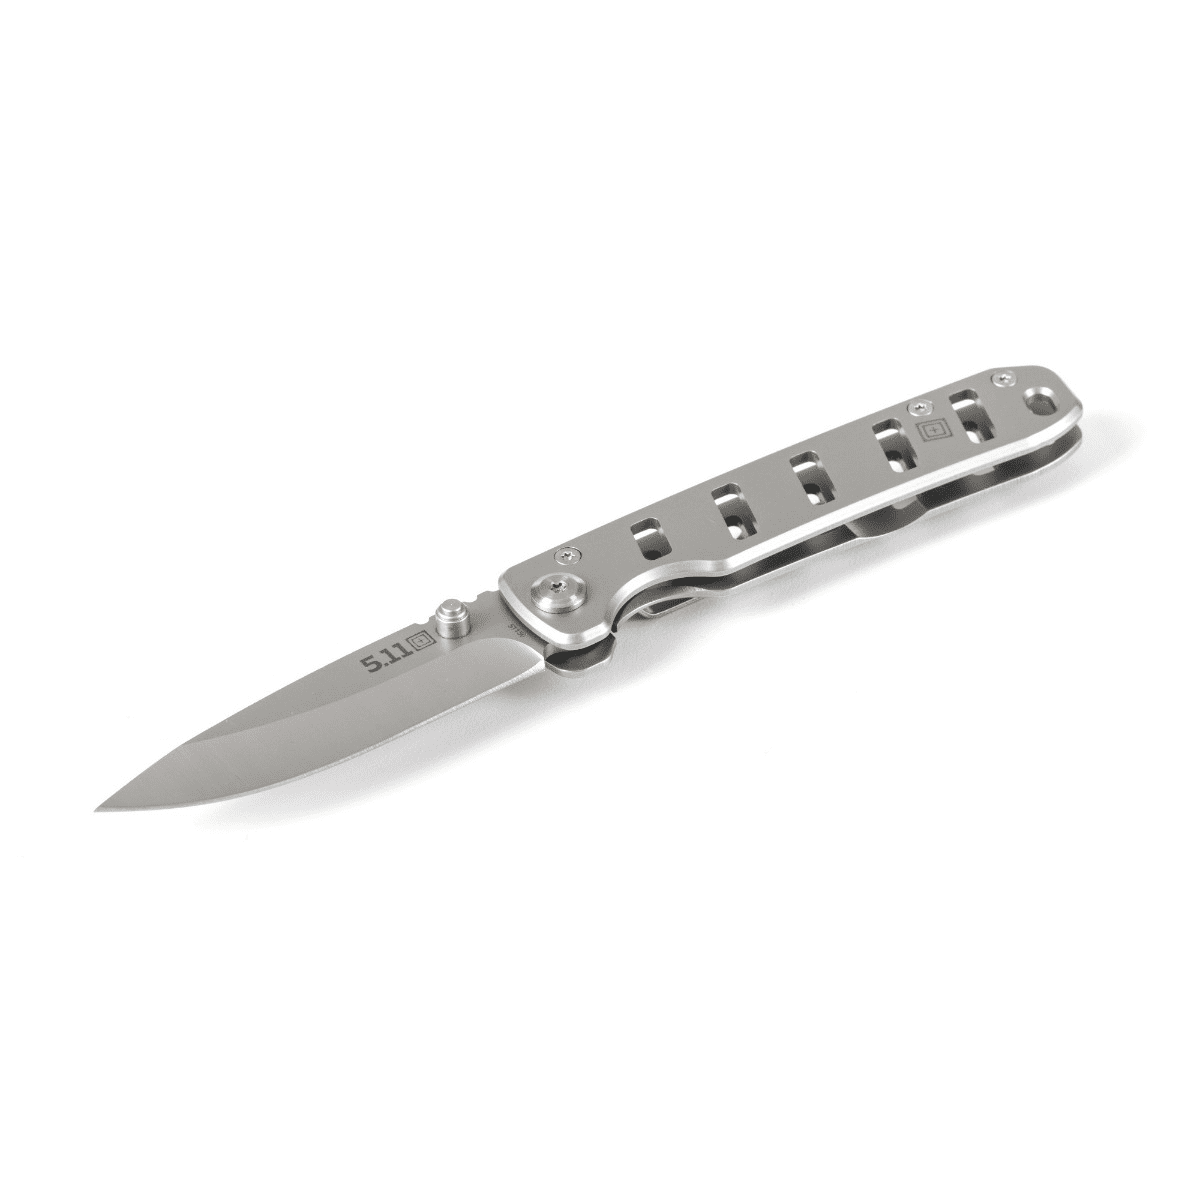 5.11 Tactical BASE 3DP Folding Knife 51156-988-1 SZ - Newest Products